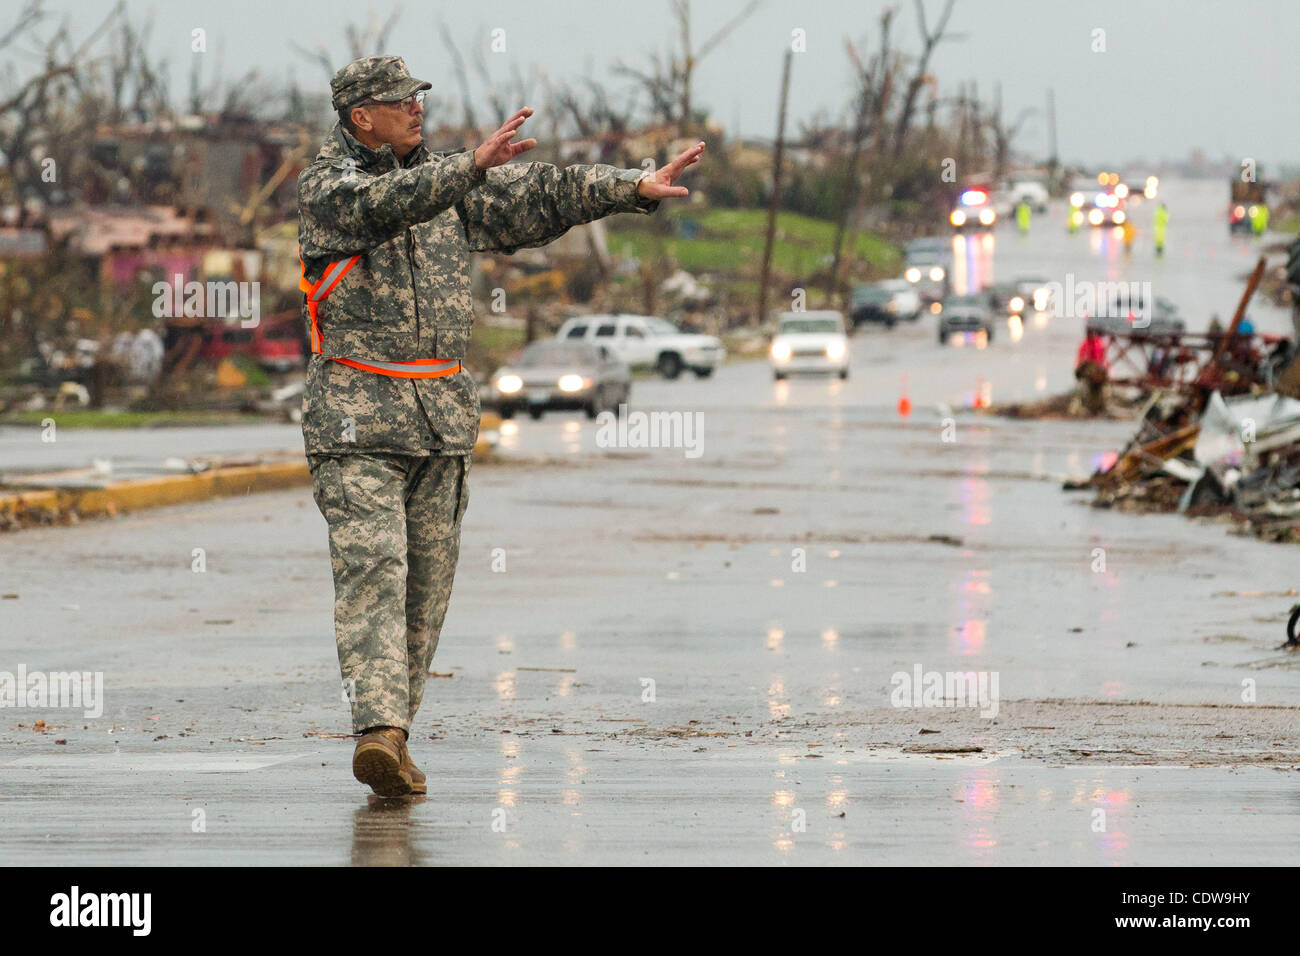 A Missouri National Guard member directs traffic in the intersection of East 20th Street and Ridge Lane Road in Joplin, Missouri after a Tornado came through the town on Sunday, May 22, 2011. Stock Photo